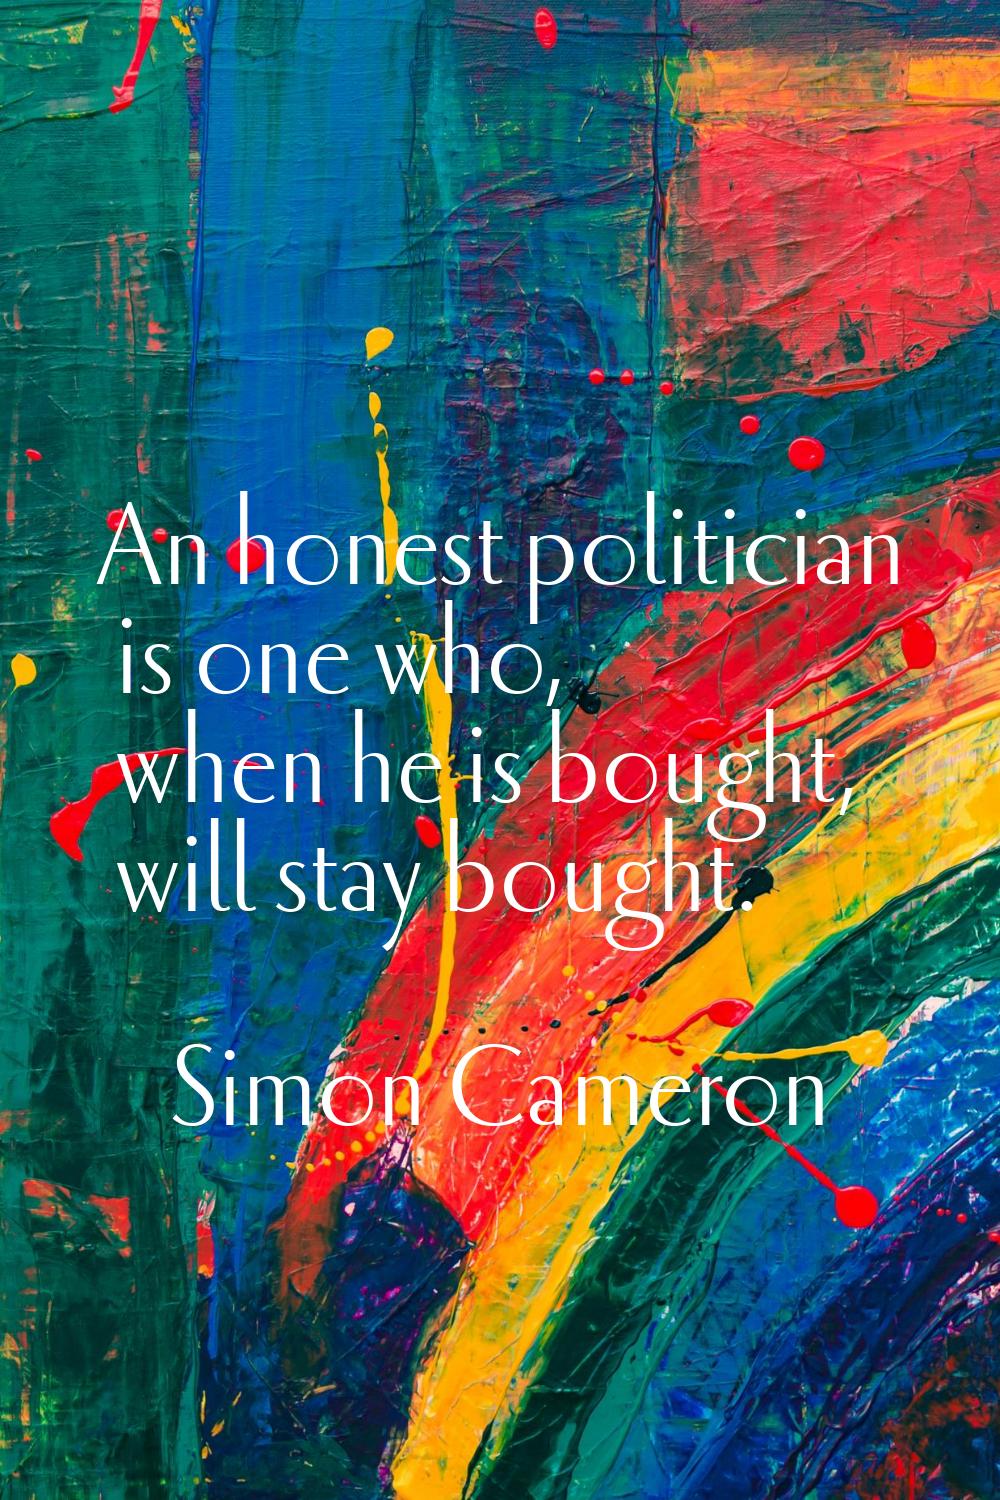 An honest politician is one who, when he is bought, will stay bought.